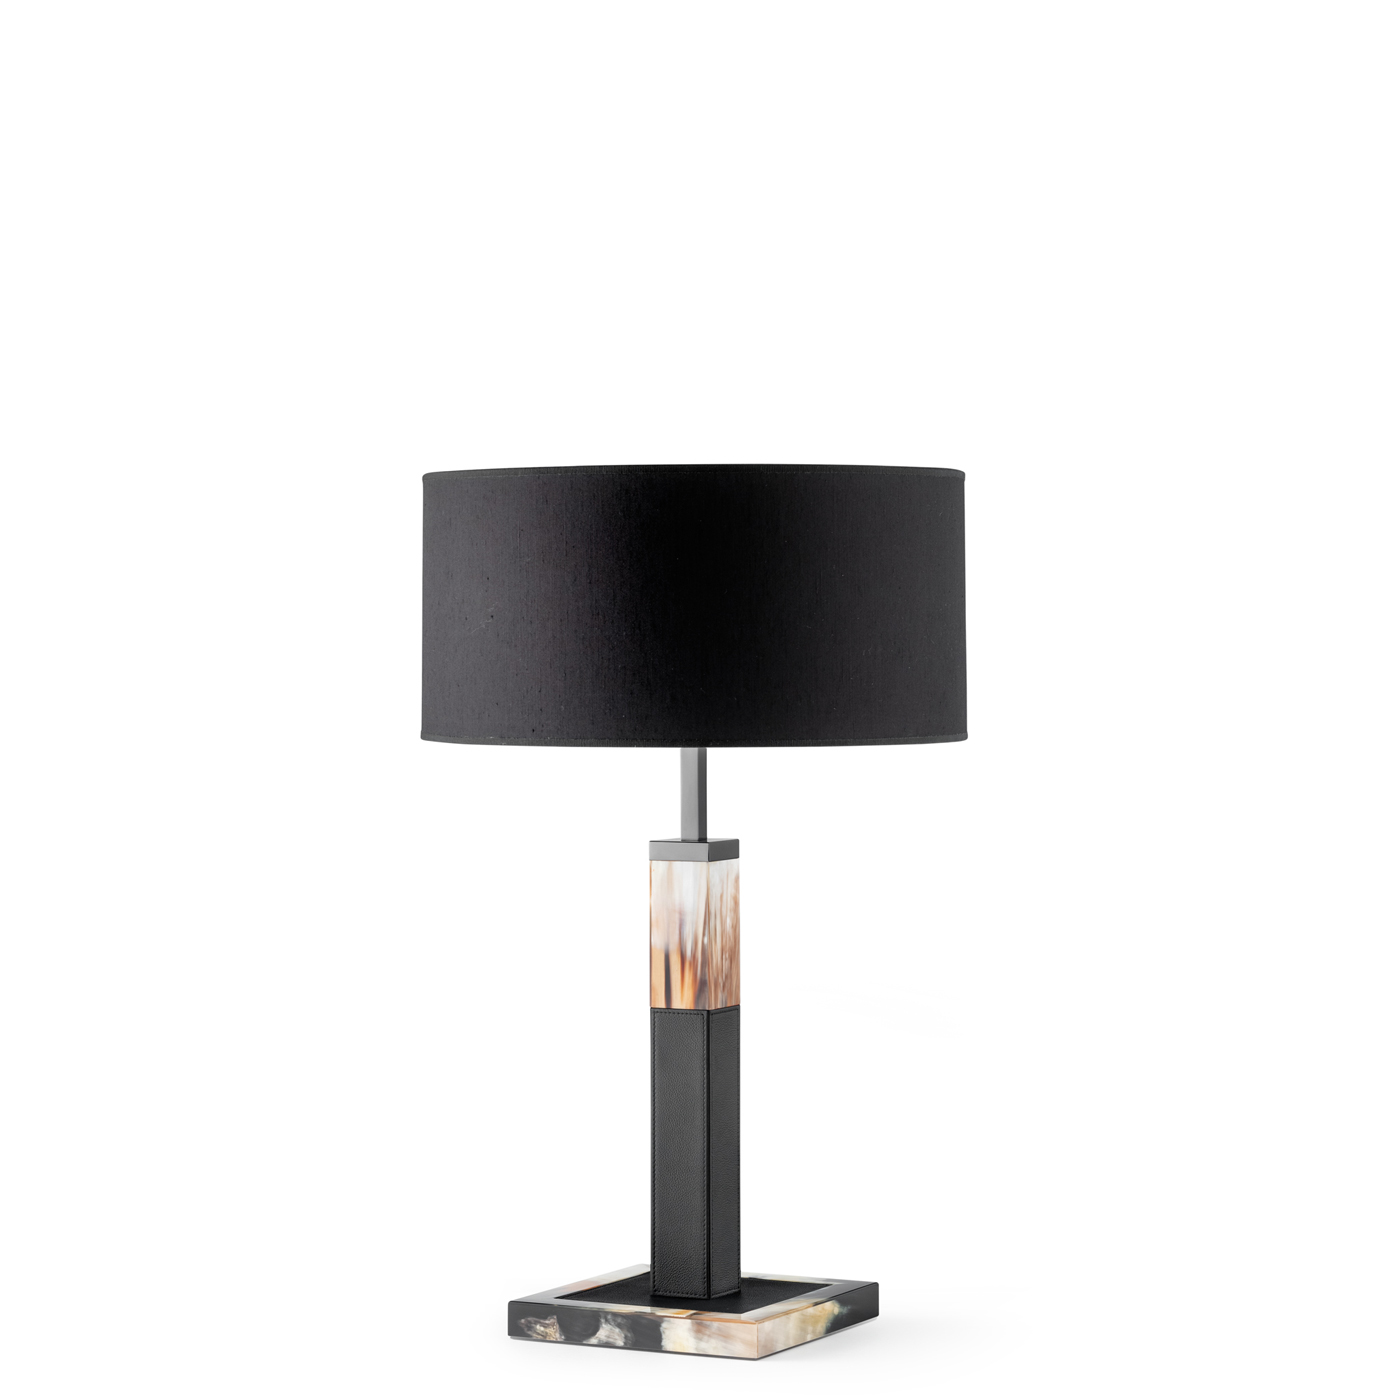 Lamps - Alma table lamp in black leather and horn - Arcahorn